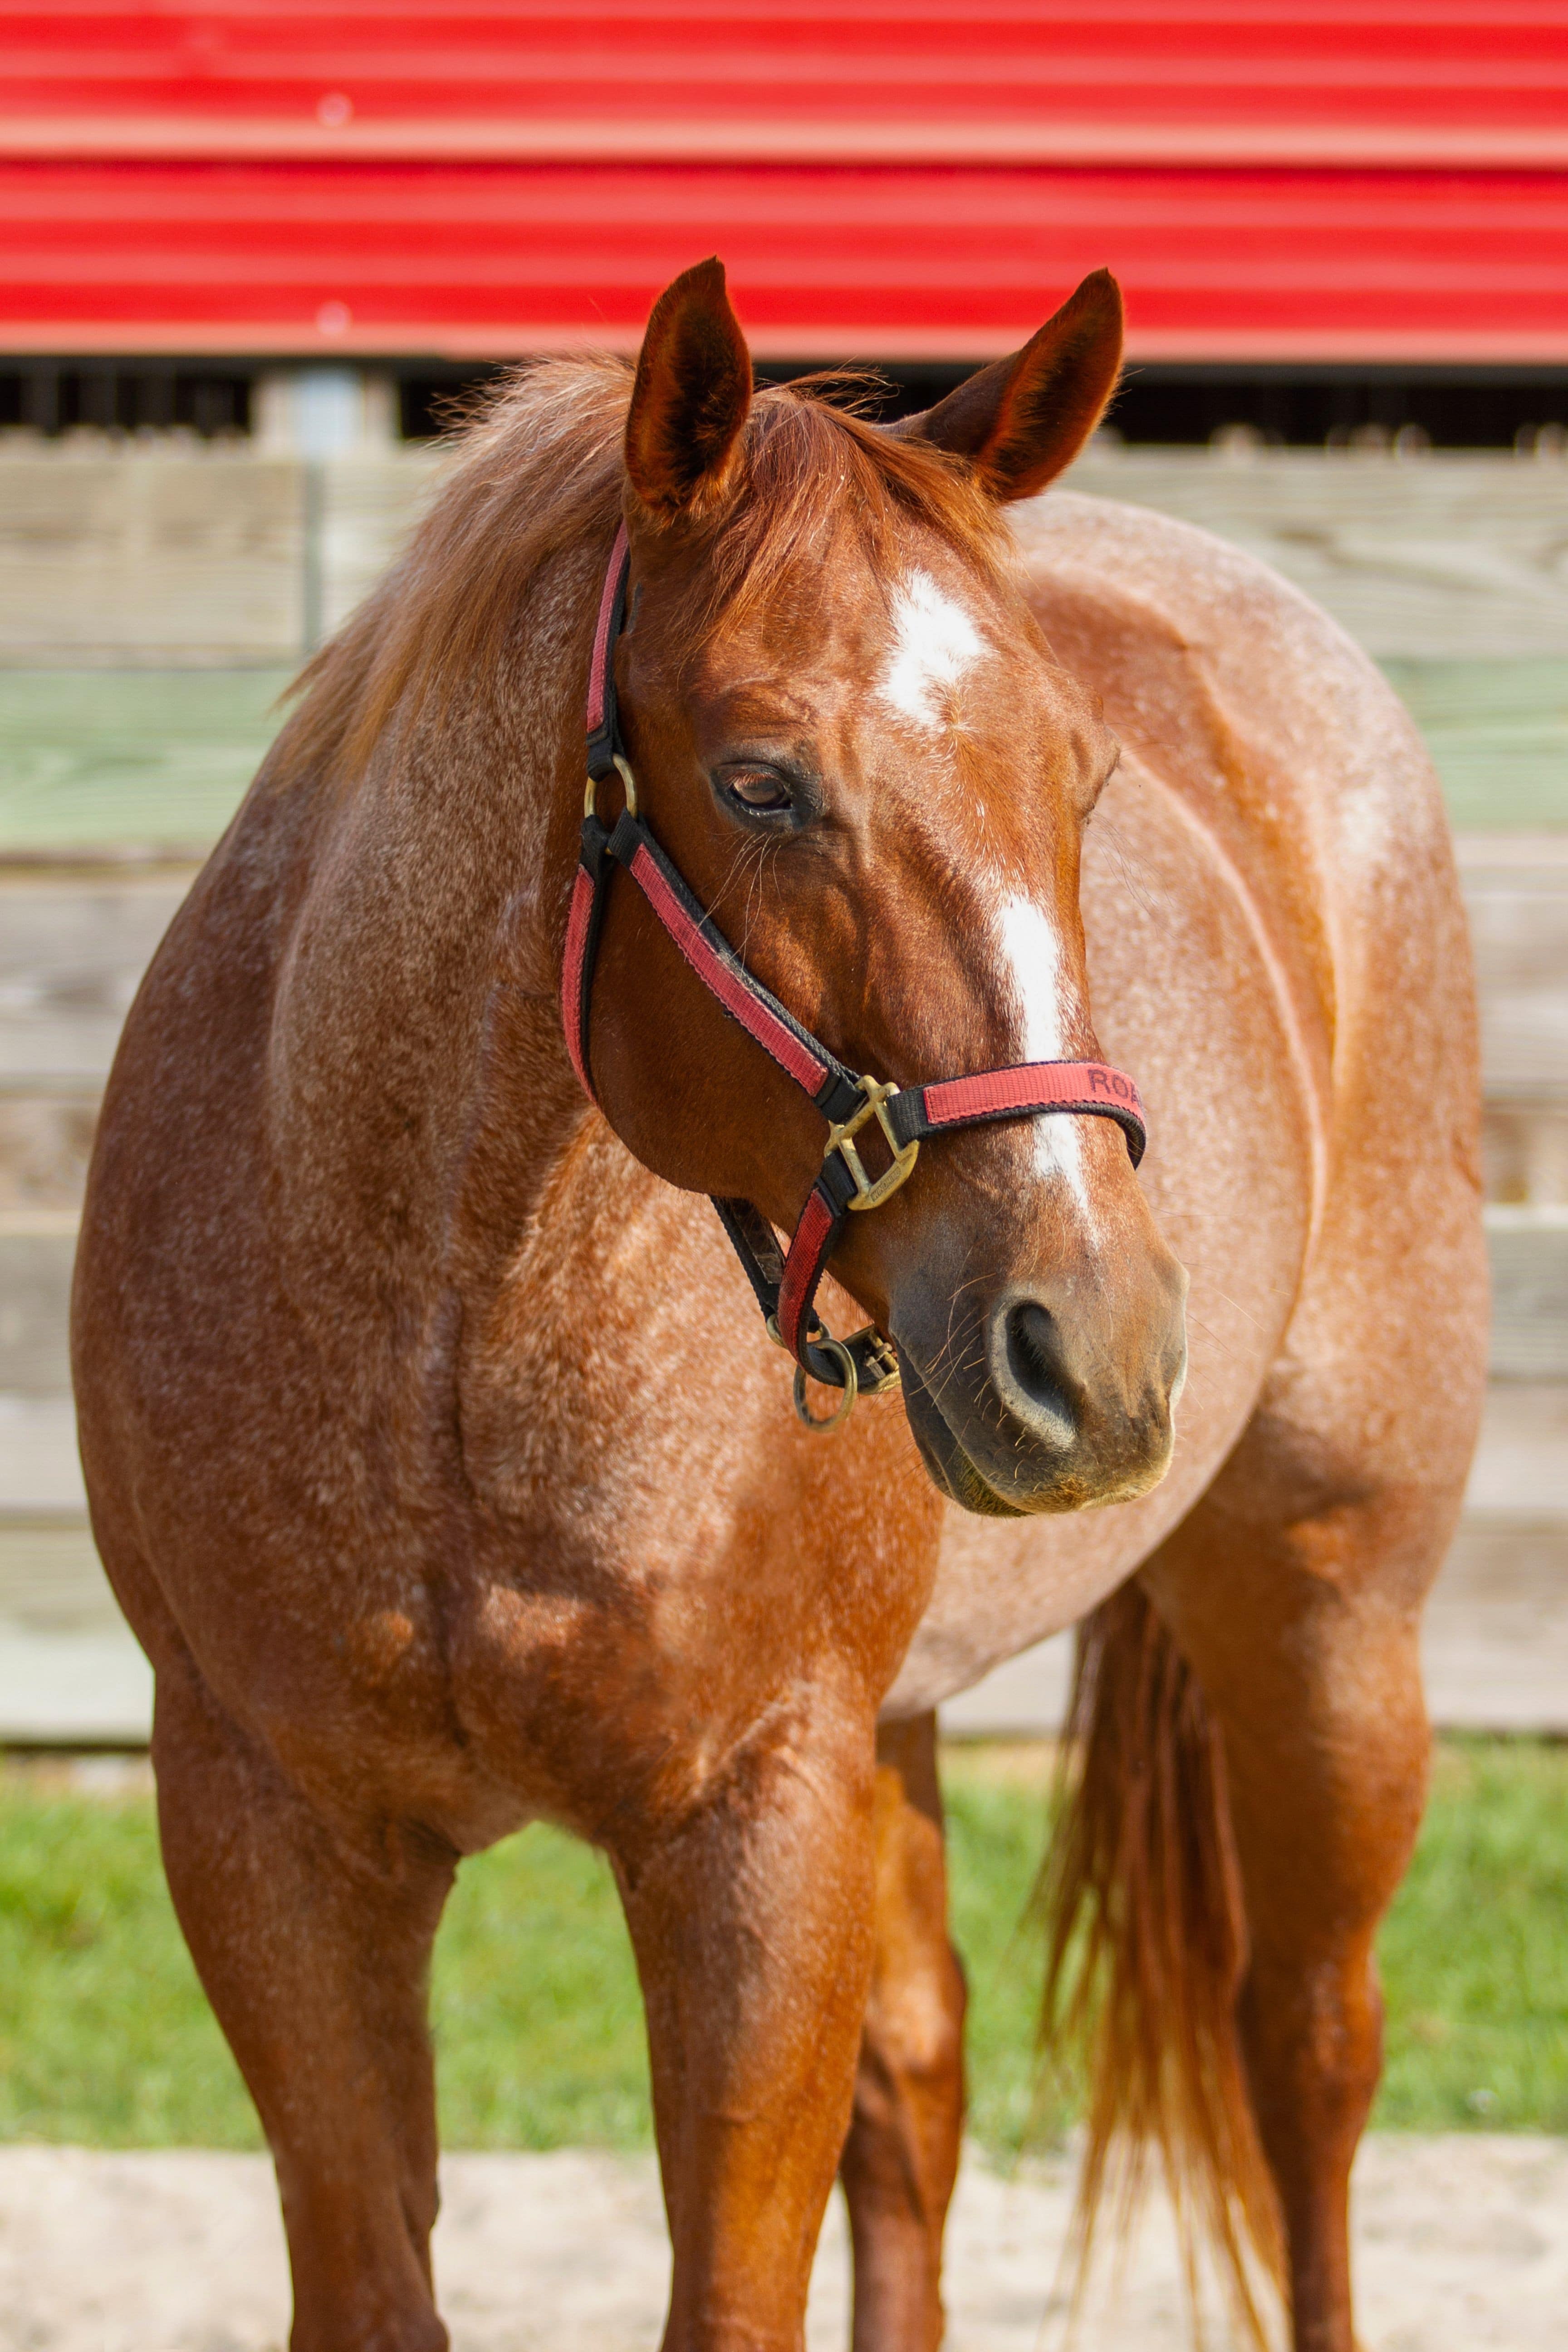 Roanie is a lesson horse at J & S Performance Horses. He is a red roan gelding with a star and a stripe, wearing a red and black halter with his name on it.